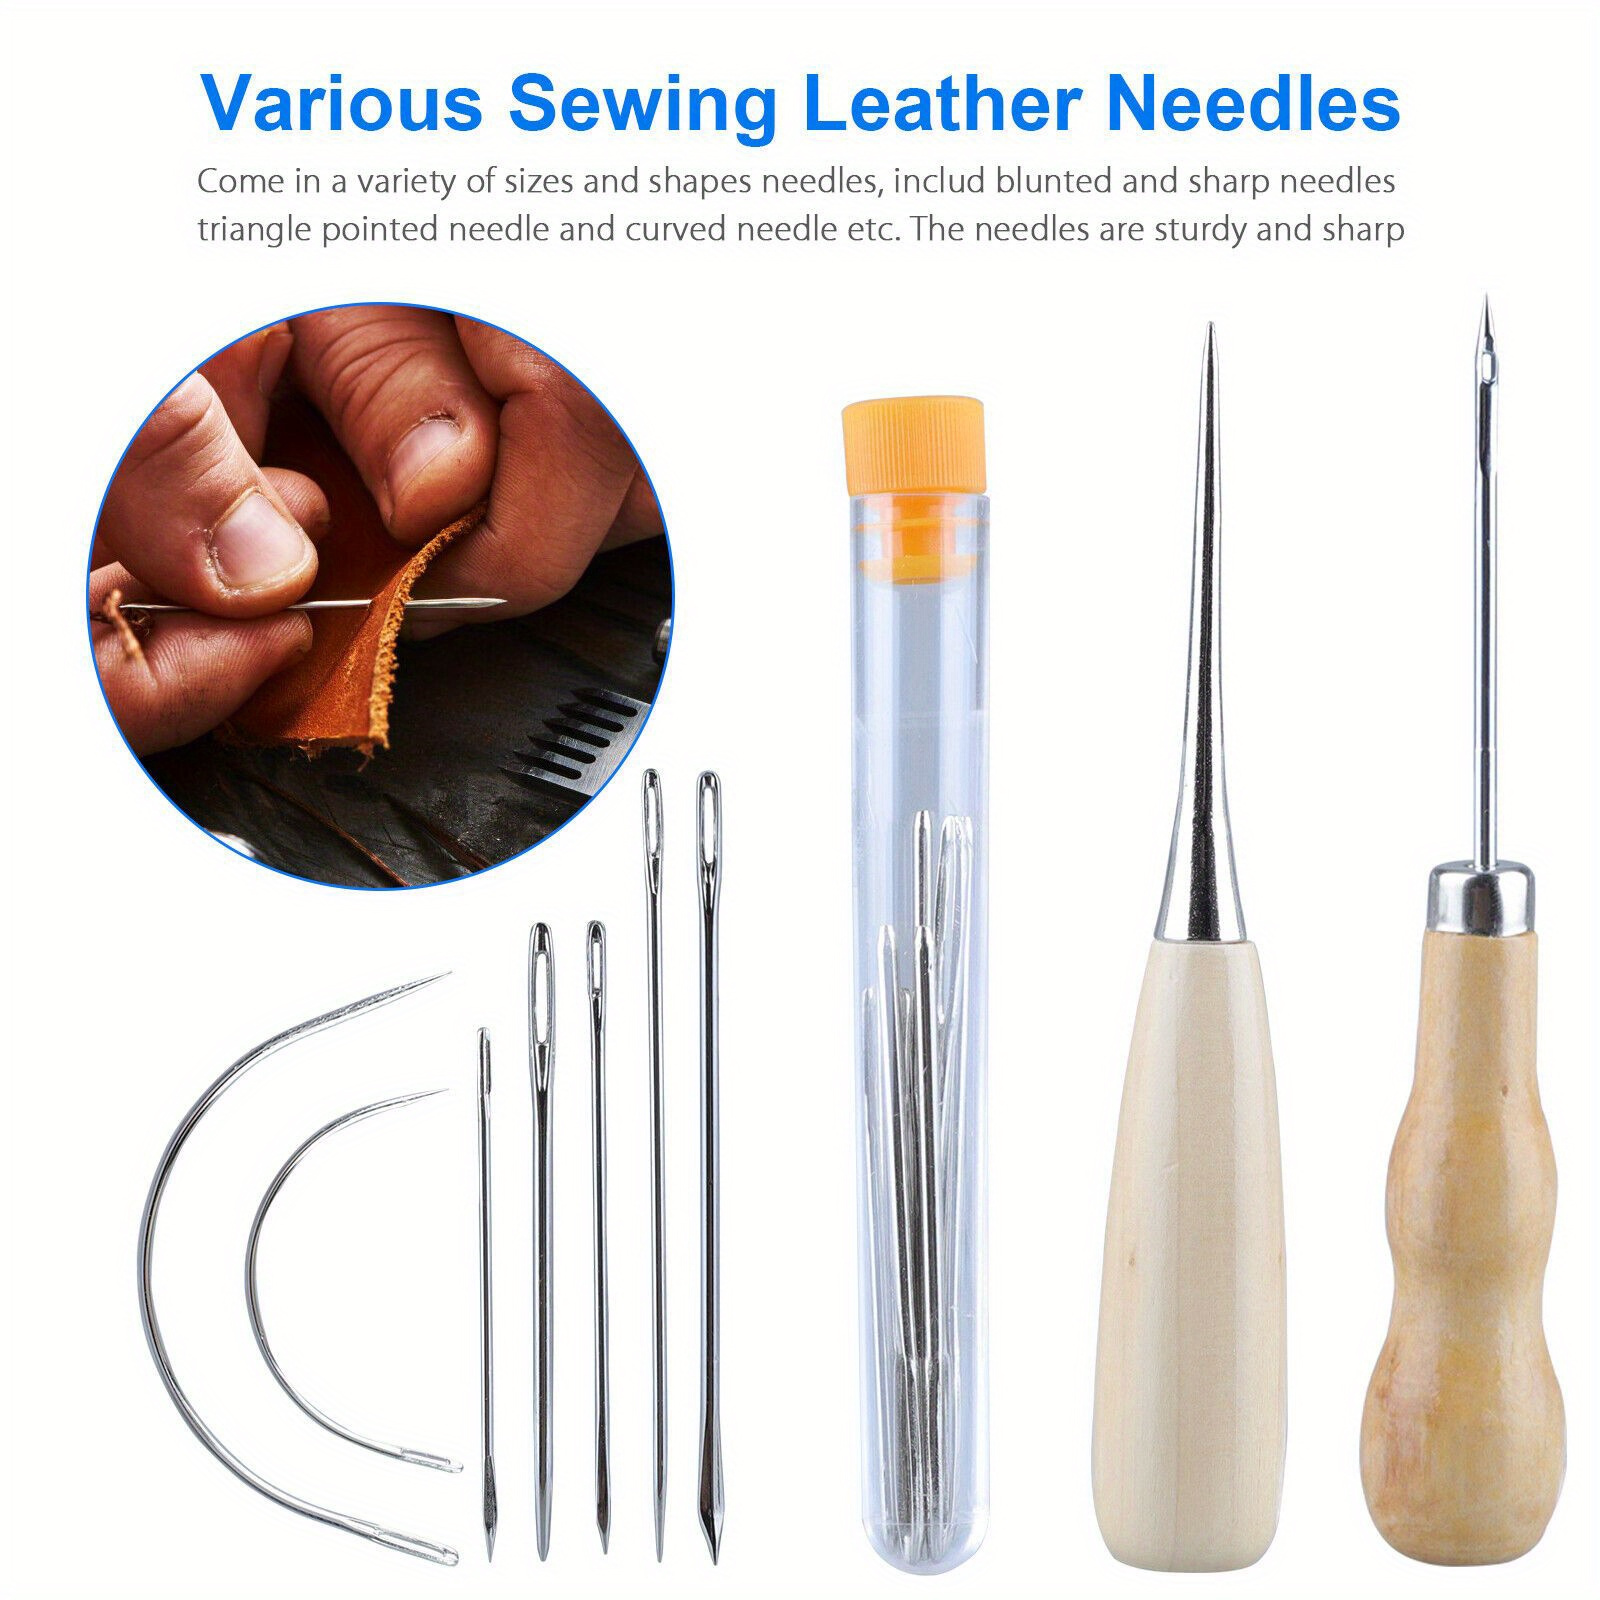 7PCS Handy Needle Set with Glover's Carpet Sail Straight Upholstery Sack  Curved Mattress For Leather Craft DIY Sewing Stitching